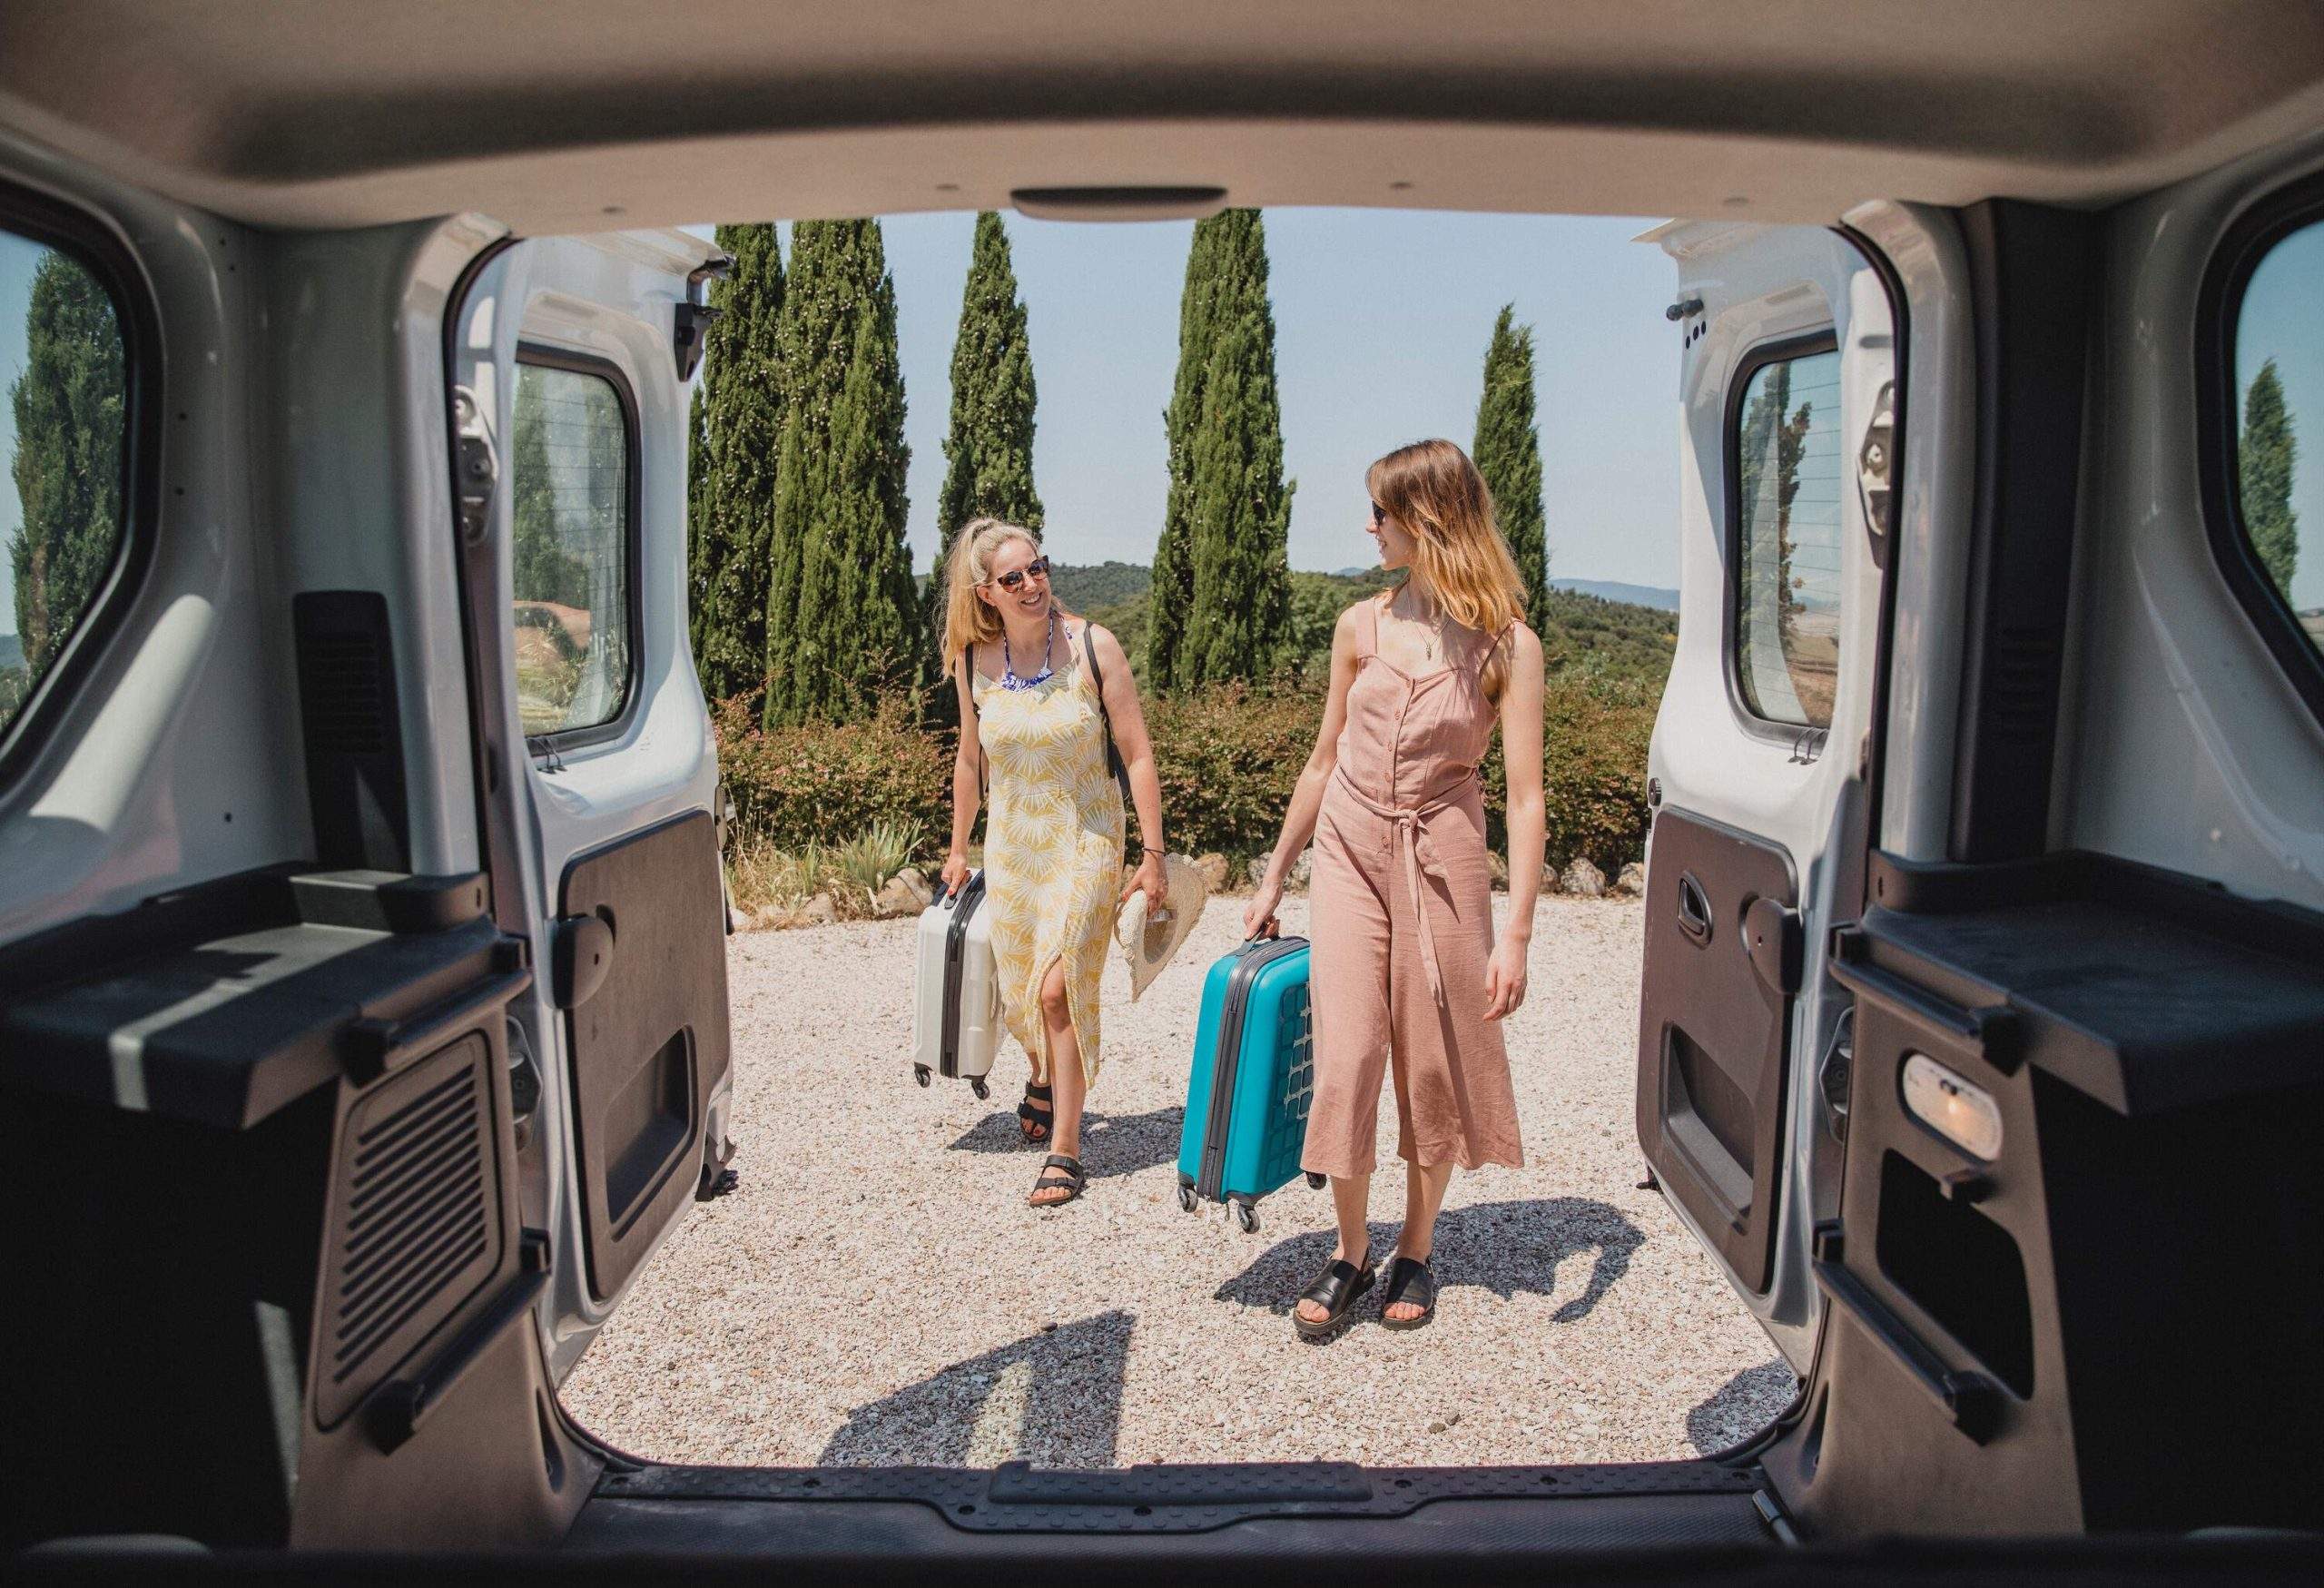 dest_italy_theme_people_car_travel_luggage_roadtrip-gettyimages-1071459200-scaled